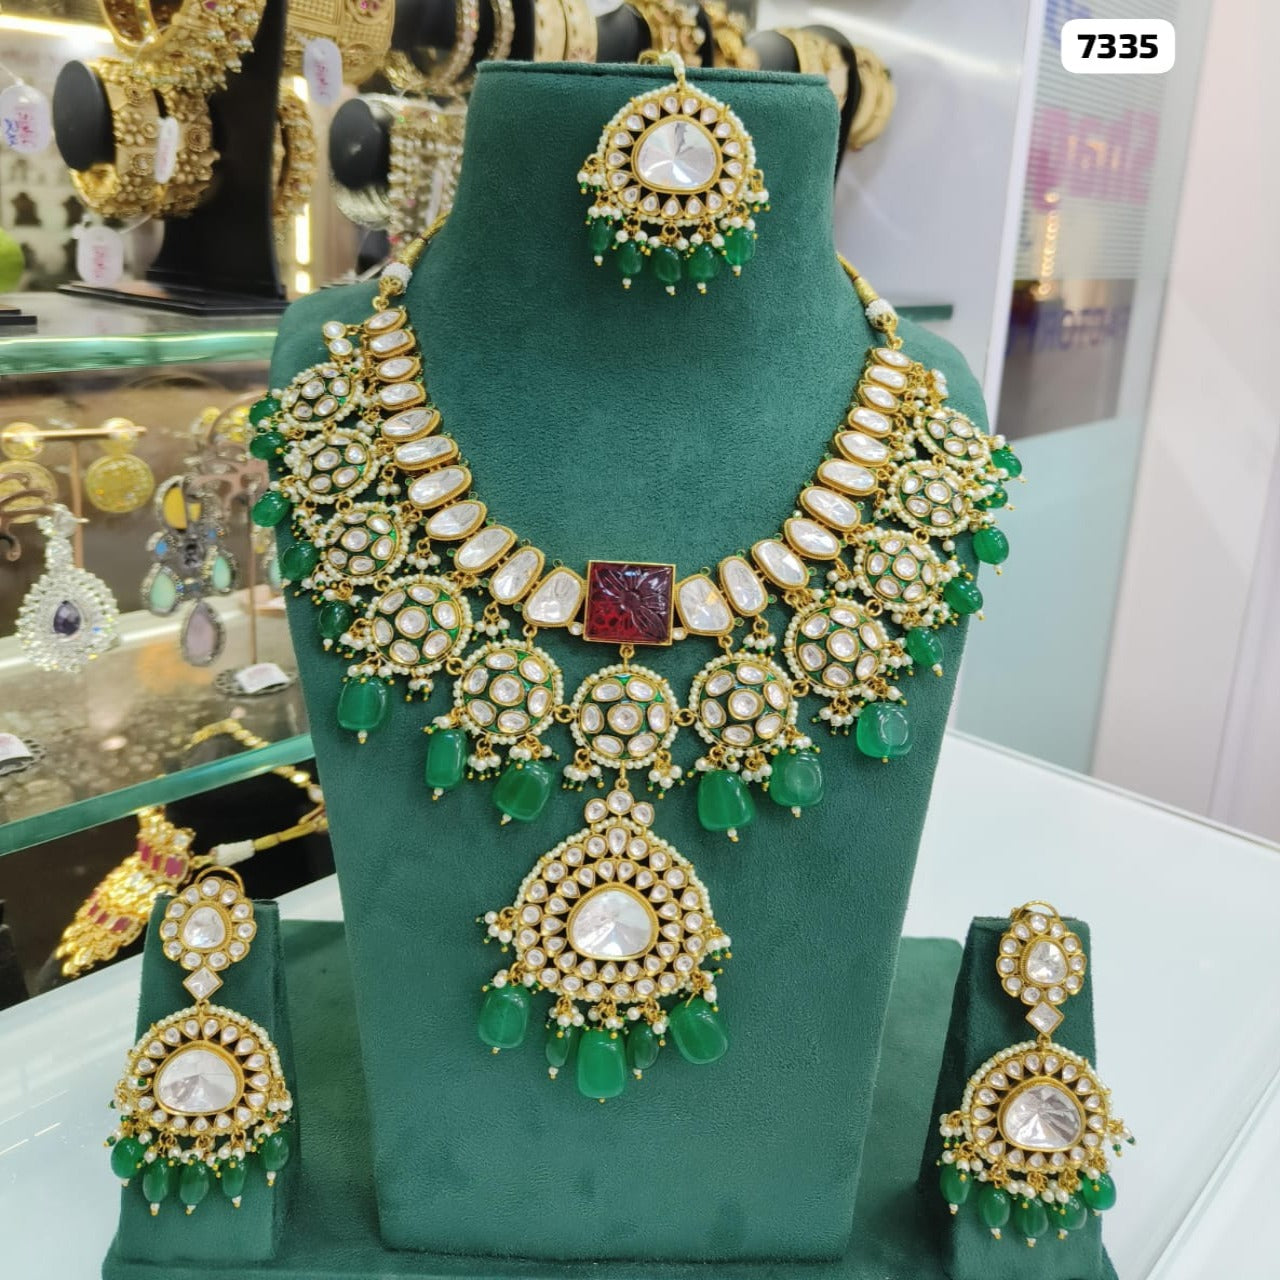 Exquisite Polki Un-cut Kundan Necklace Set with Earrings and Maangtikka - Timeless Elegance and Traditional Glamour